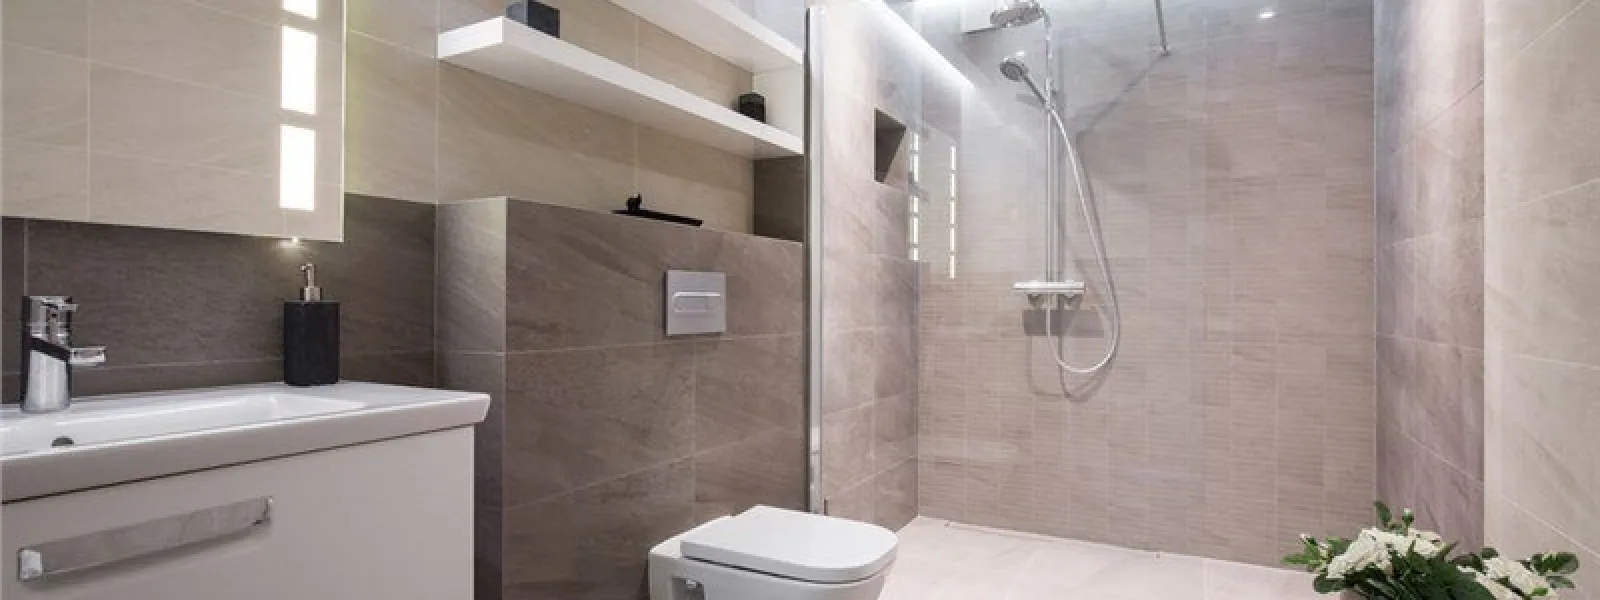 How to Make the Most of Your Bathroom With a New Shower